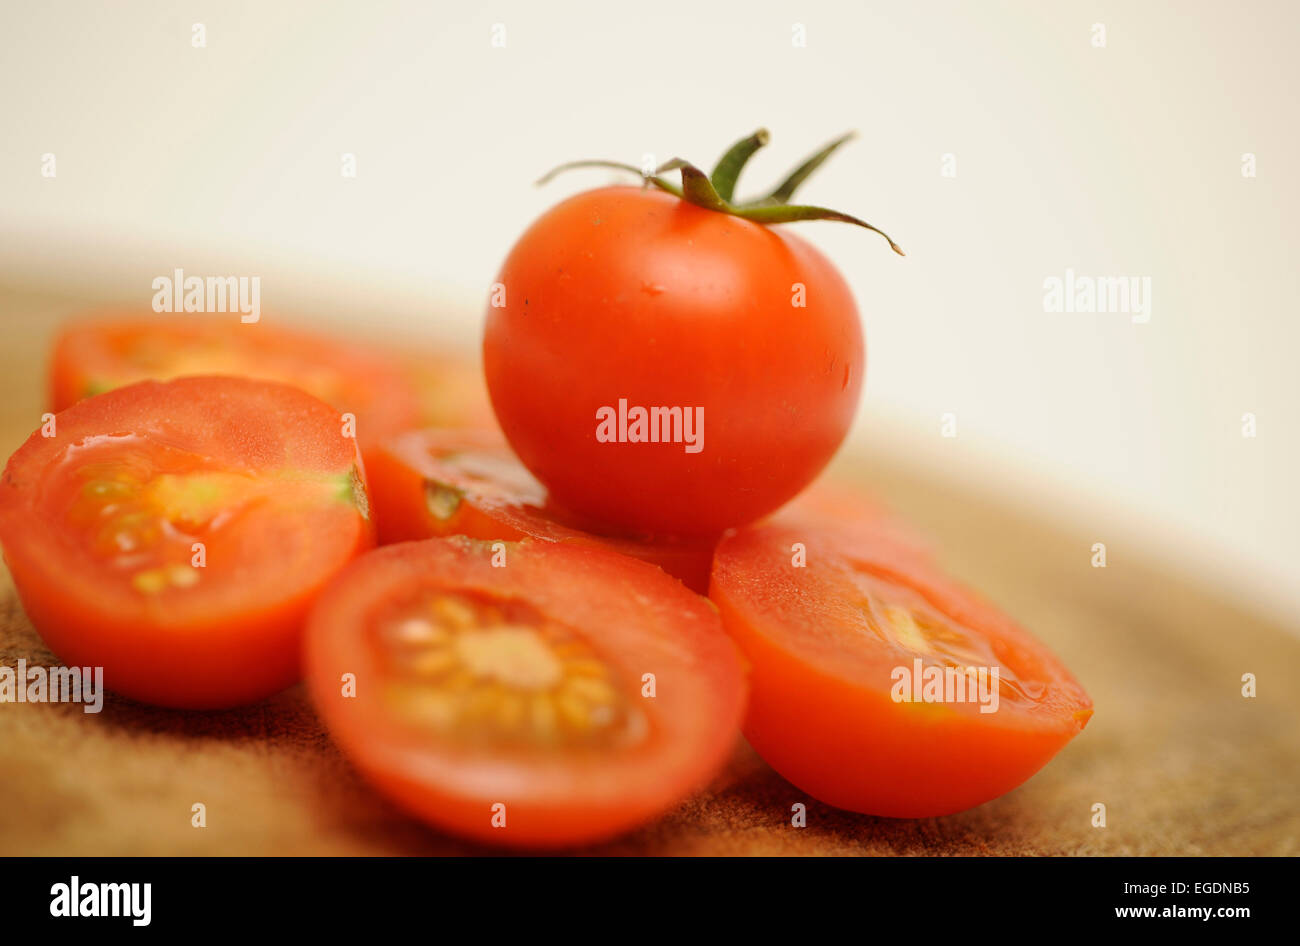 Tomato on a Chopping Board Stock Photo